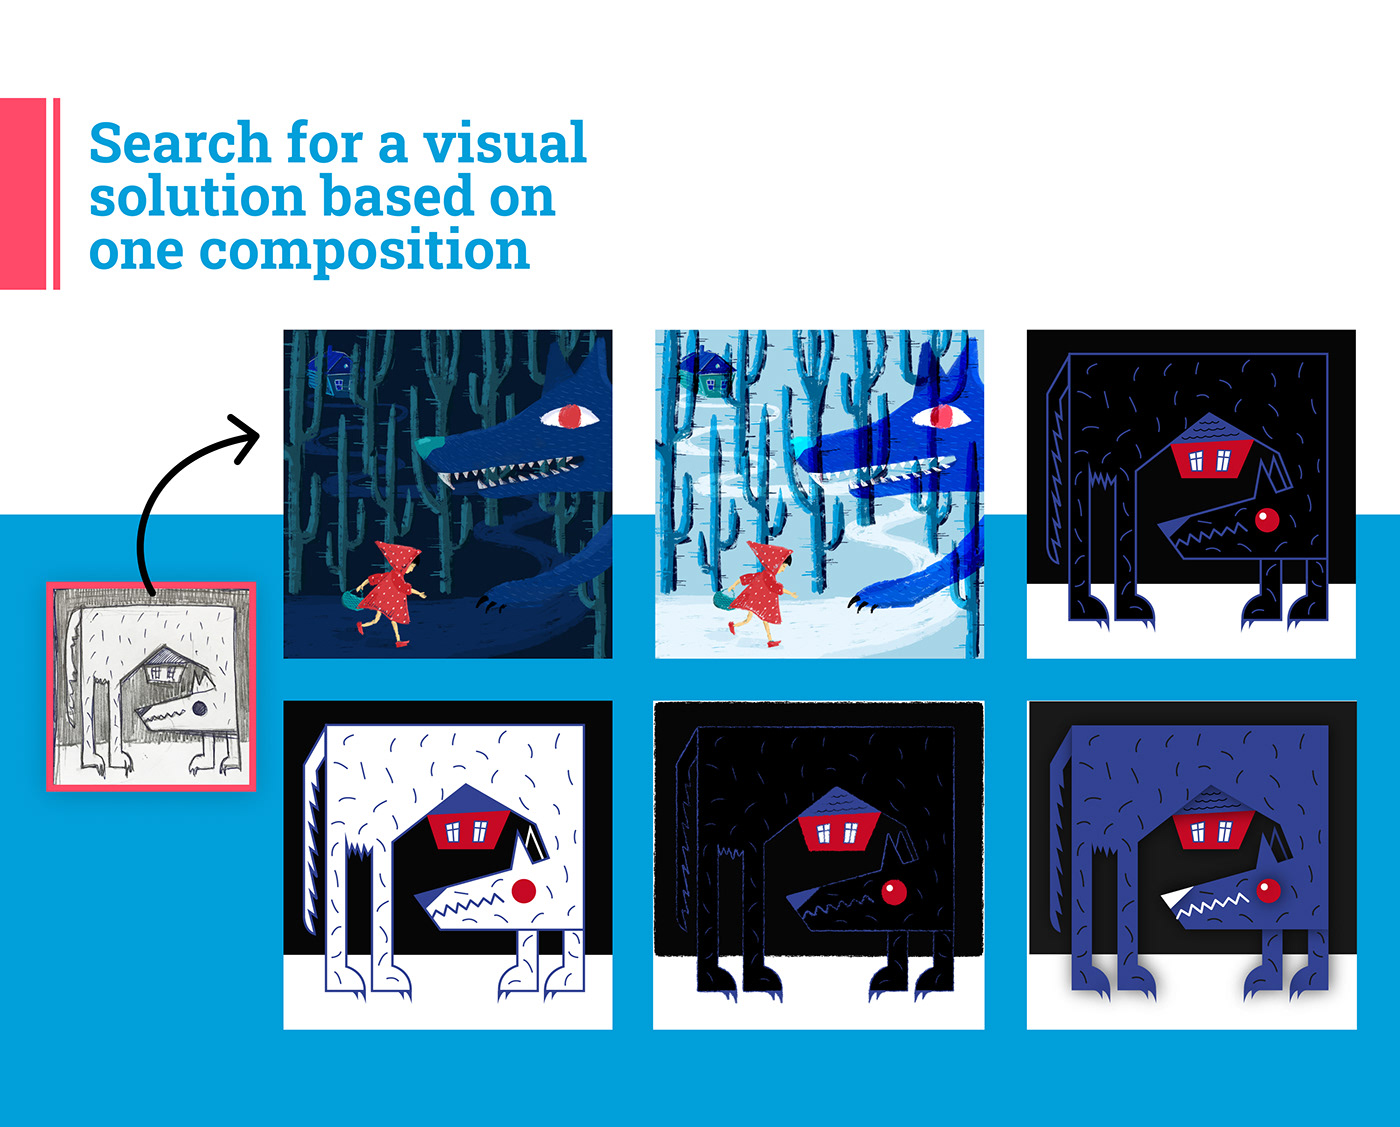 Search for a visual solution based on one composition